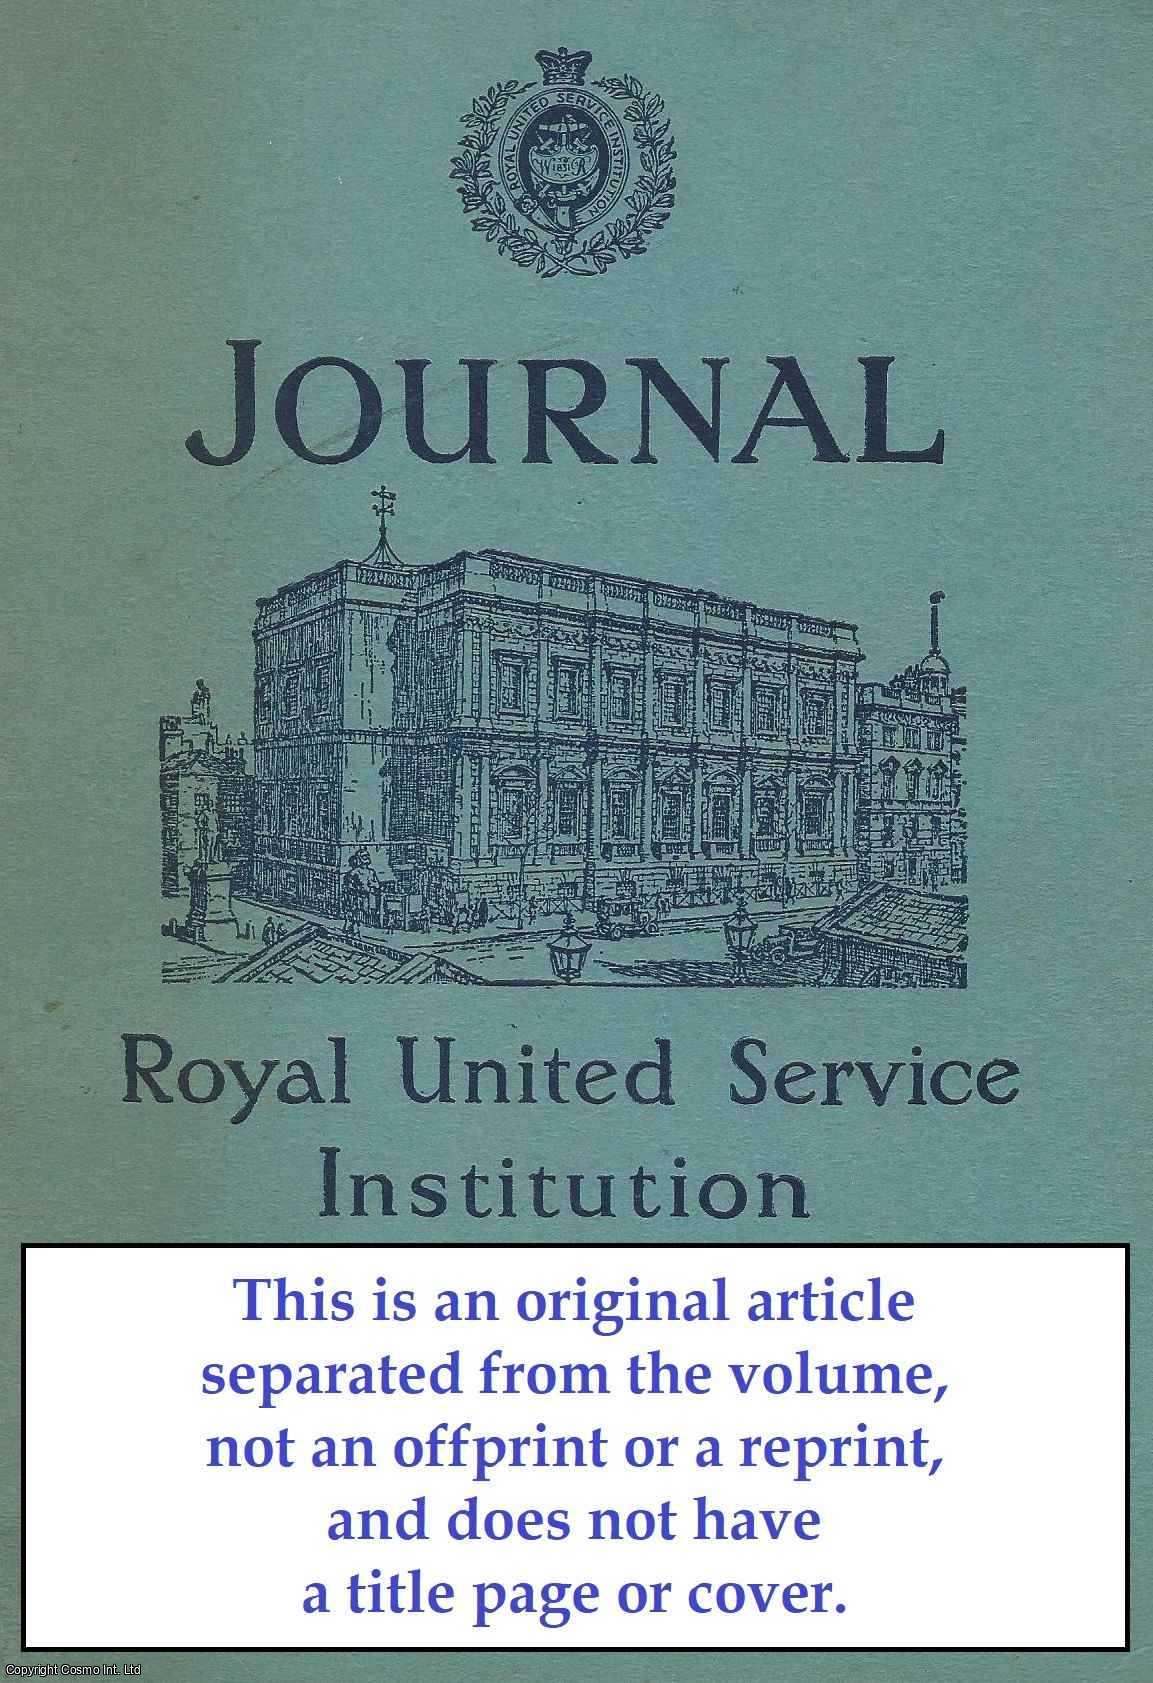 Anthony Verrier - Guyana and Cyprus: Techniques of Peace-Keeping. An original article from The Royal United Service Institution Journal, 1966.